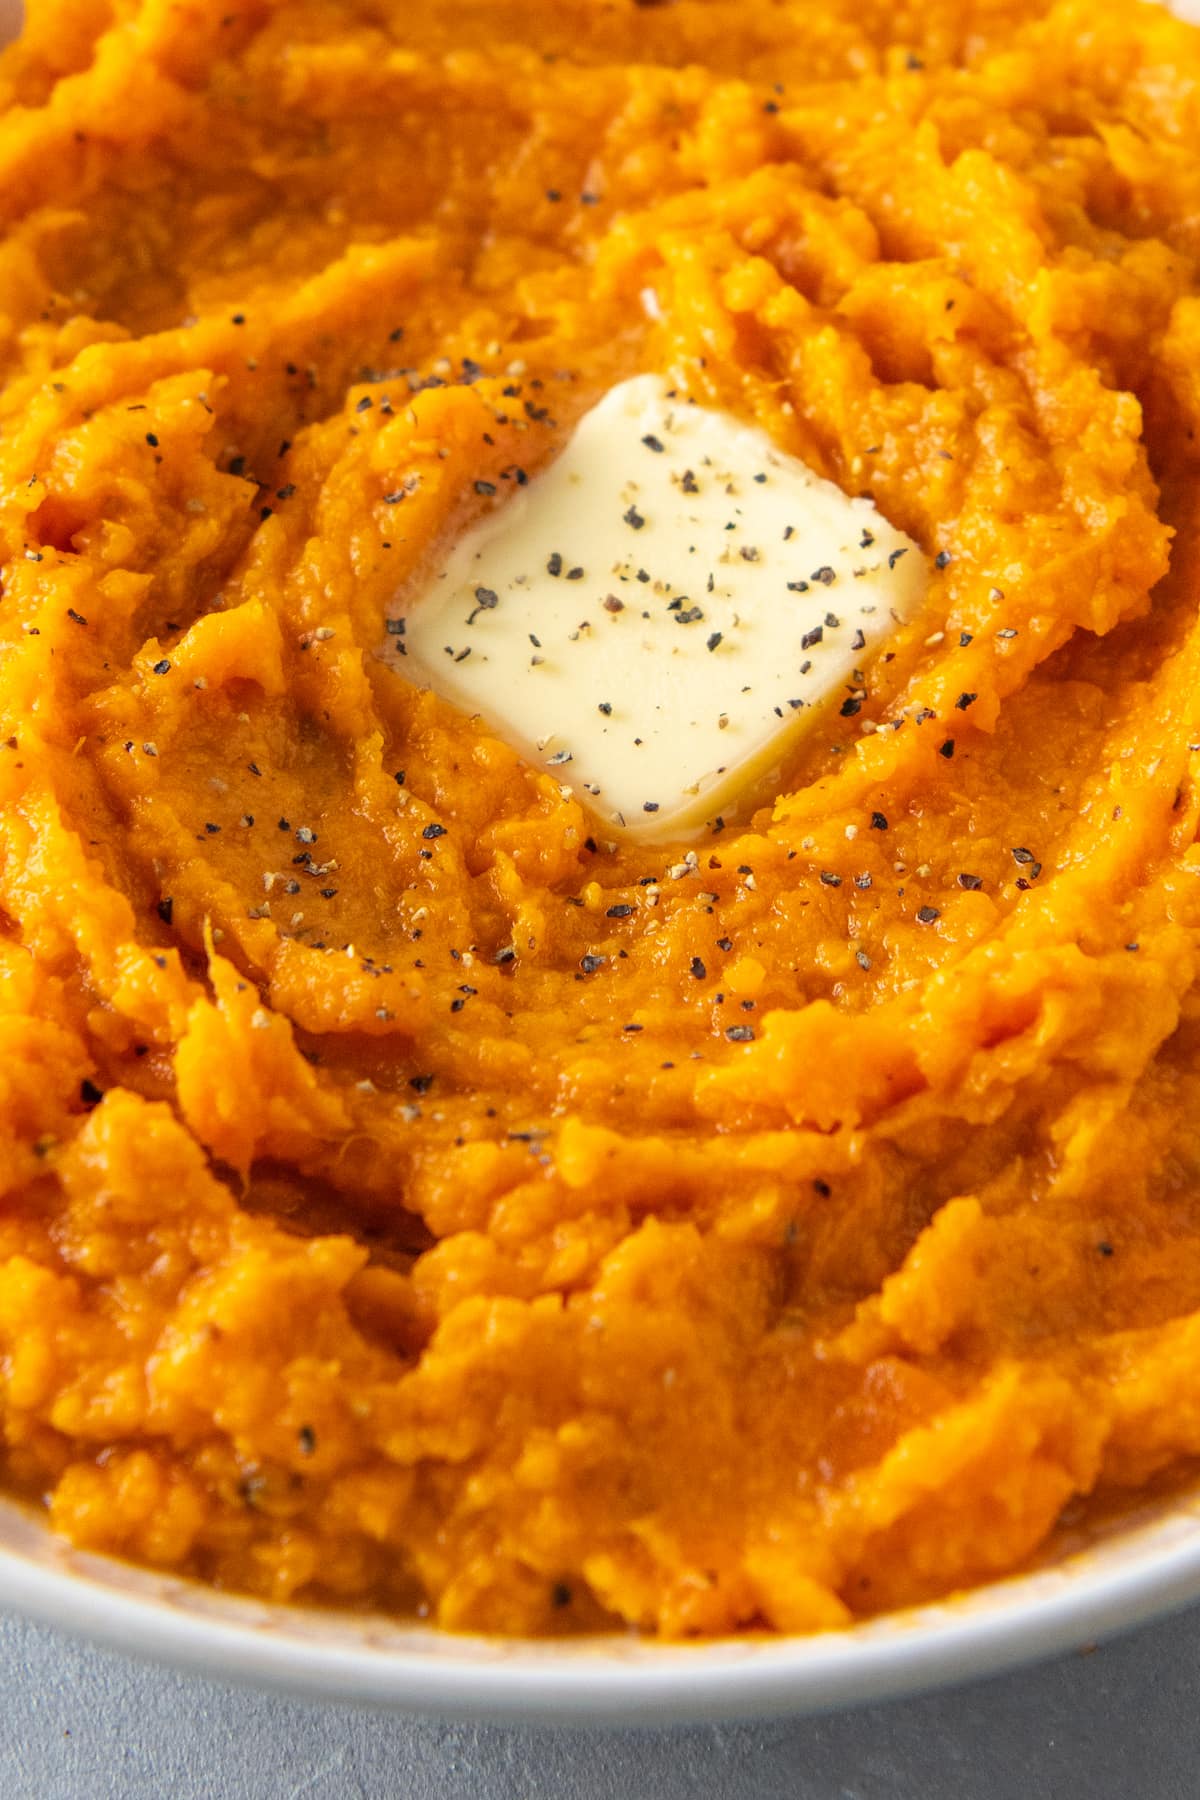 mashed sweet potatoes with a pad of butter in the middle